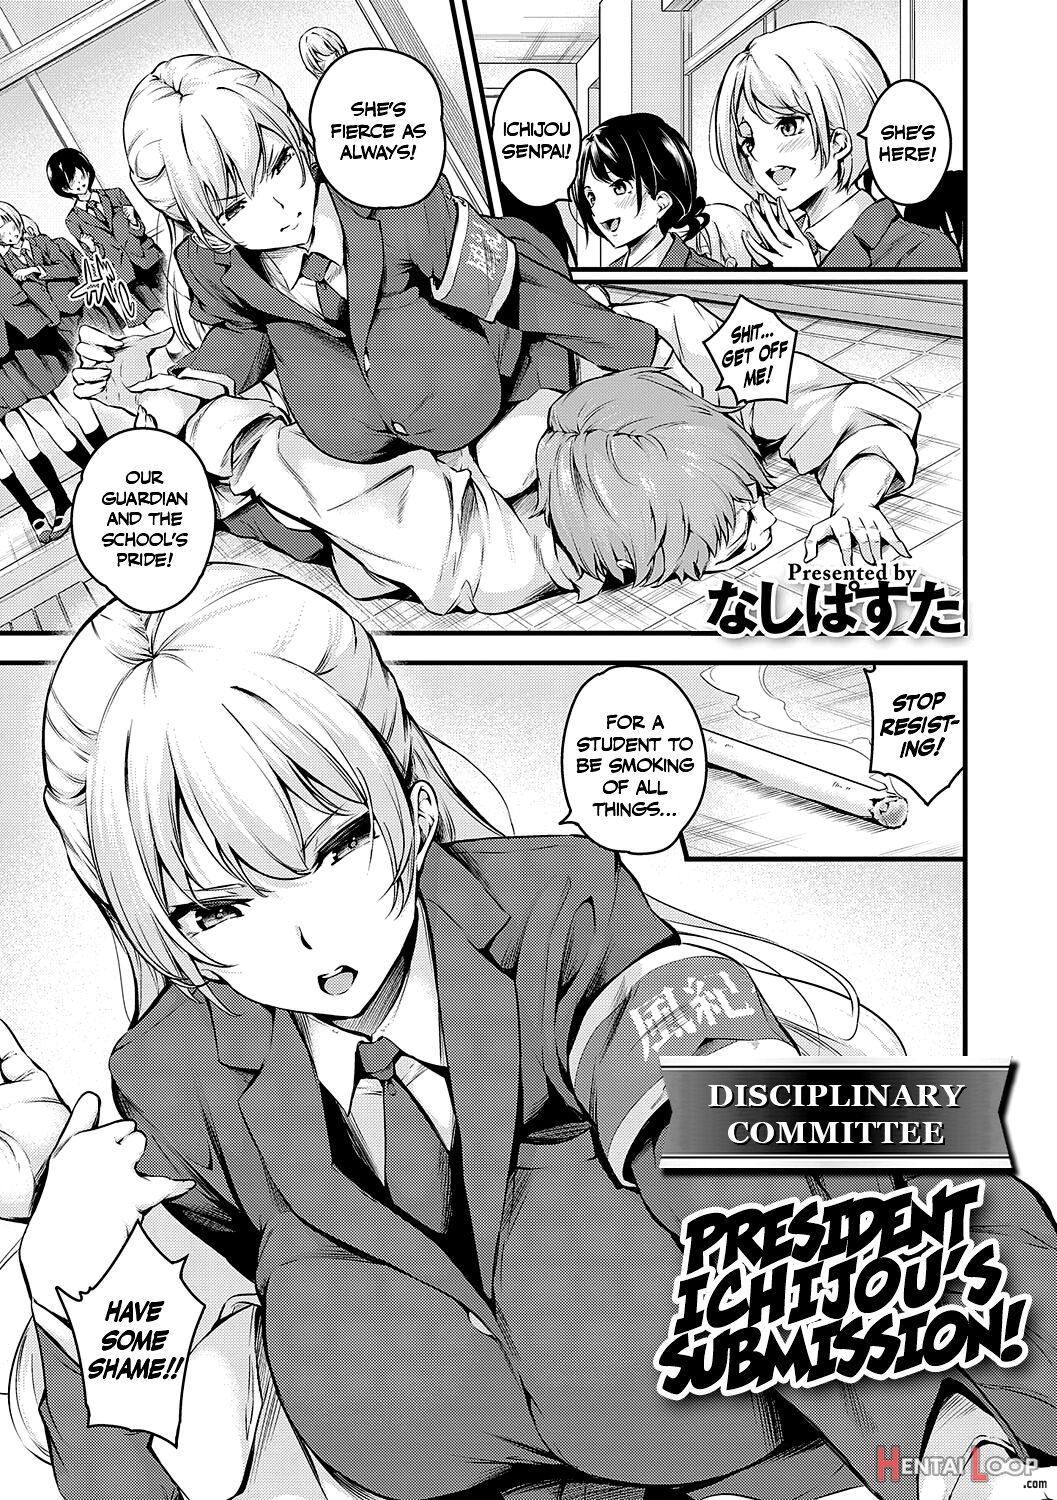 Disciplinary Committee President Ichijou’s Submission! + After page 1